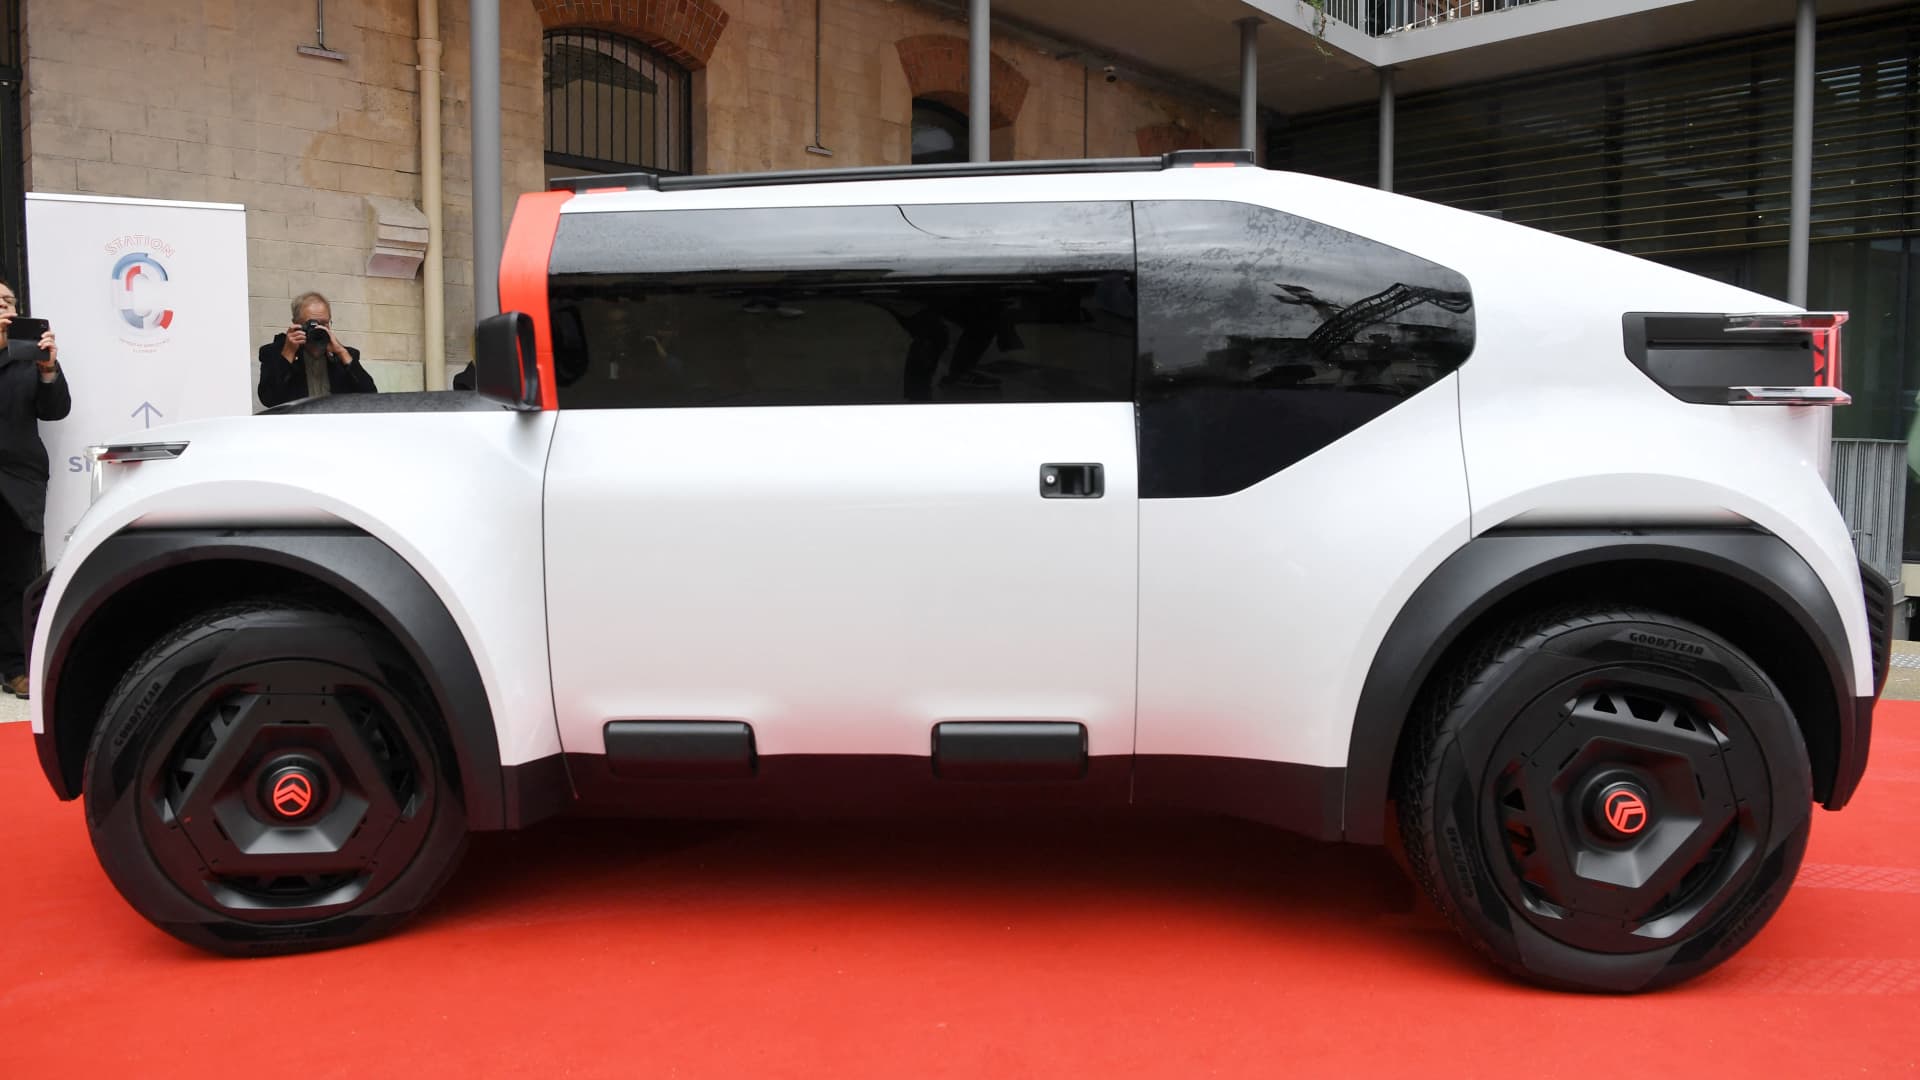 Citroen's oli concept car photographed in Paris on September 29, 2022. The carmaker says it has a top speed of 68 miles per hour.